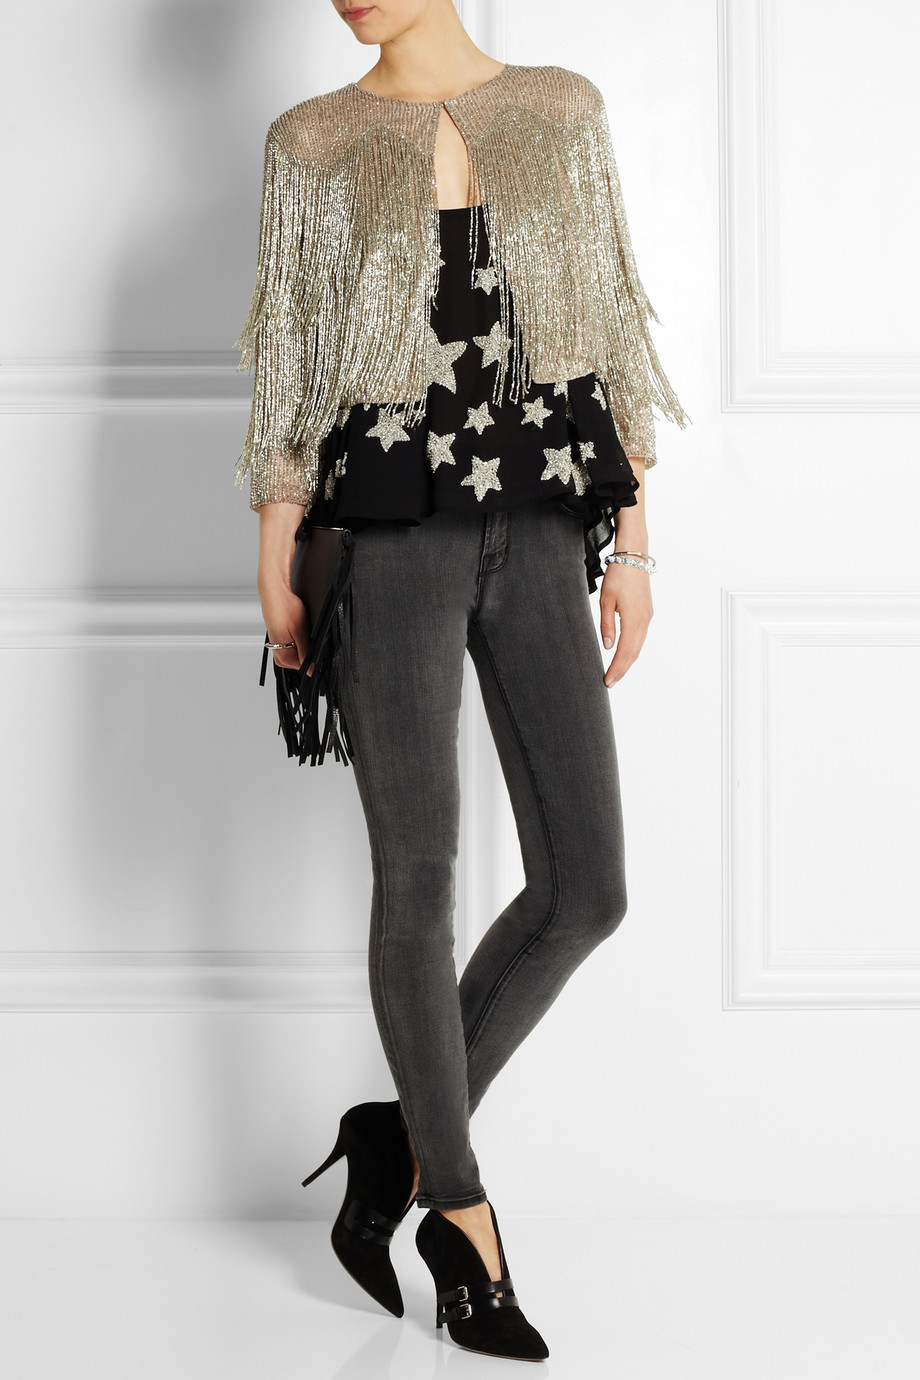 TOPSHOP Fringed Beaded Tulle Jacket in Metallic | Lyst